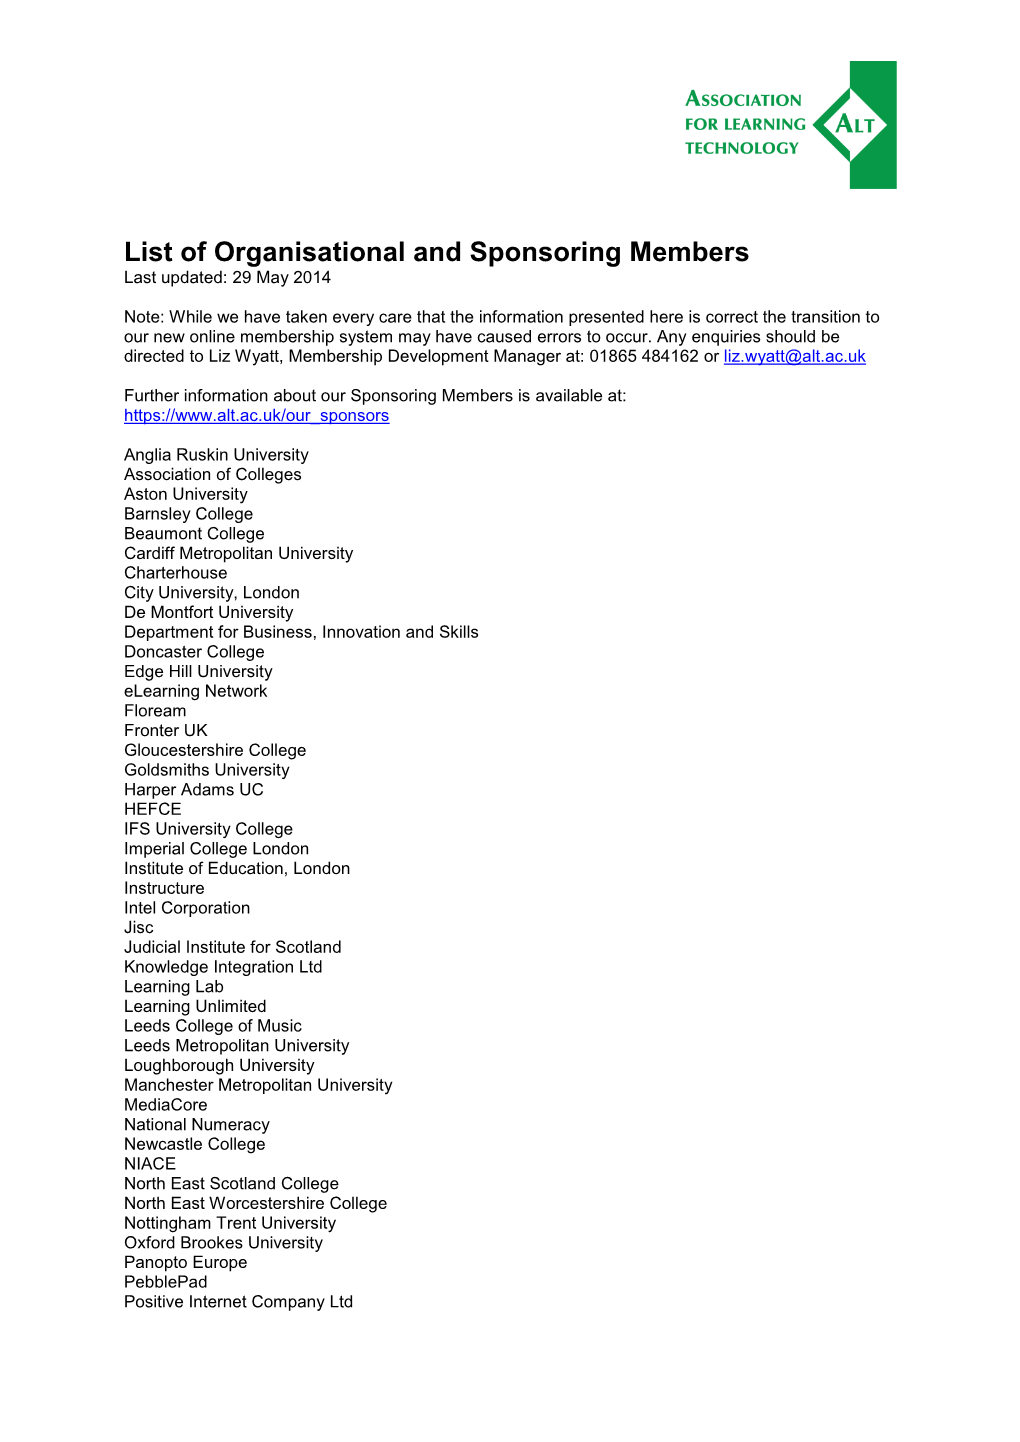 List of Organisational and Sponsoring Members Last Updated: 29 May 2014